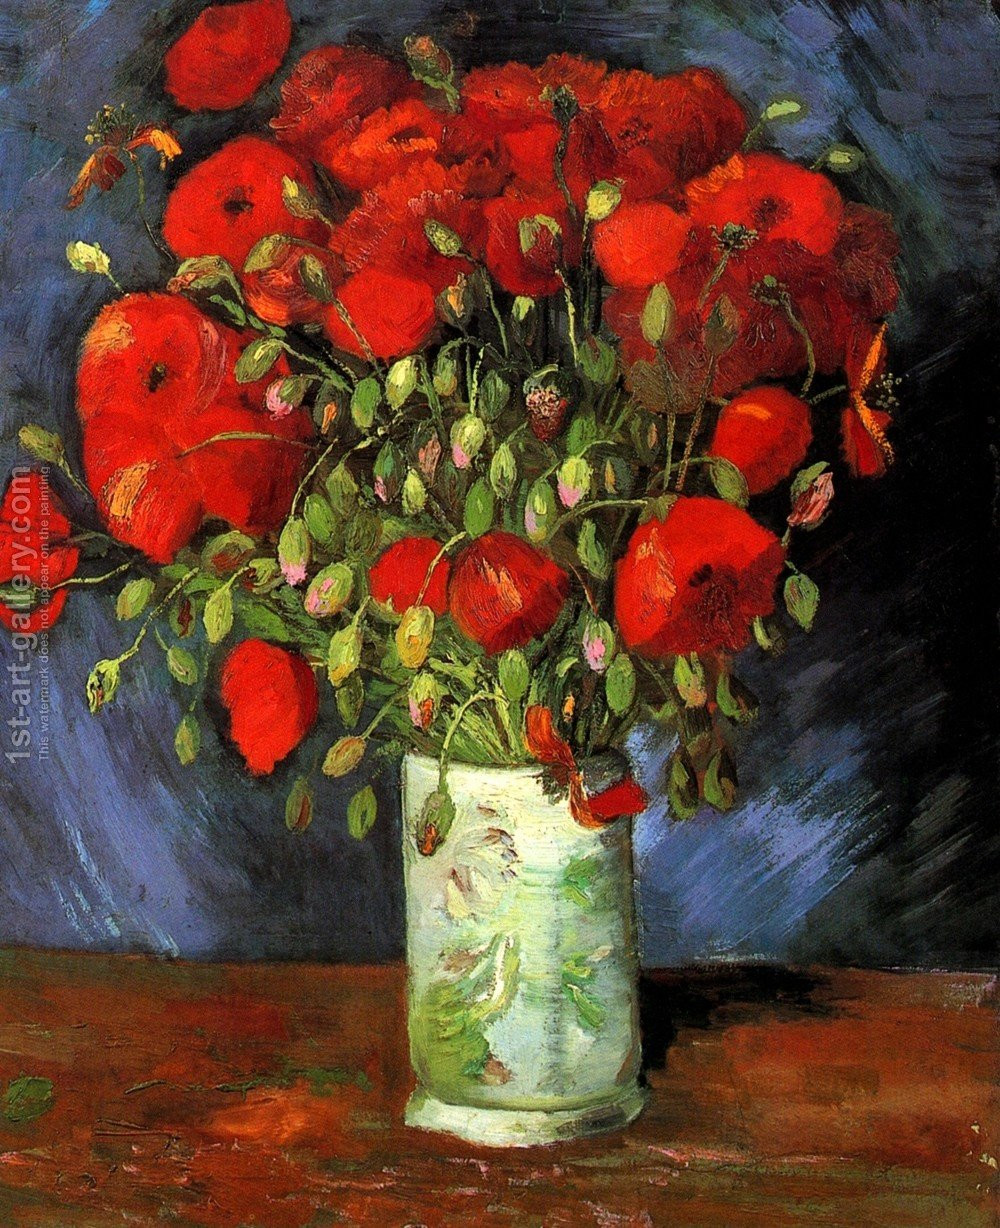 cezanne blue vase of famous bouquets paintings reproductions 1st art gallery with famous paintings of bouquets vase with red poppies